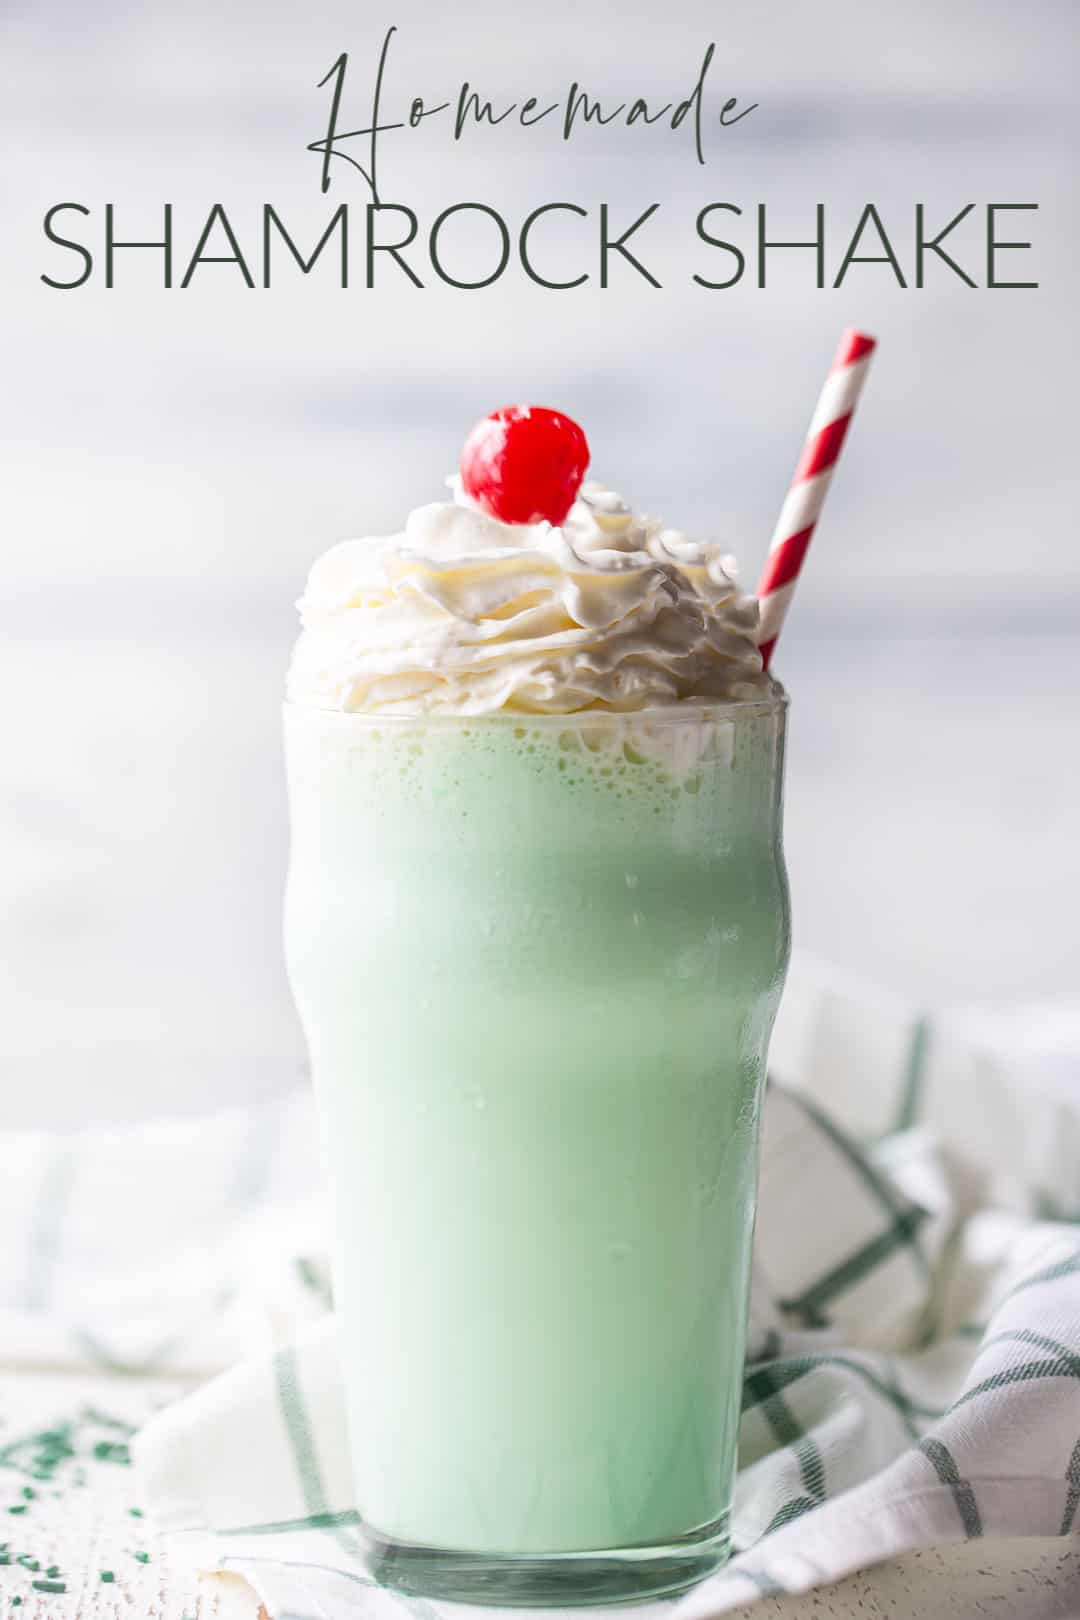 McDonald's shamrock shake copycat recipe prepared and served in a tall glass, with a text overlay above reading "Homemade Shamrock Shake."